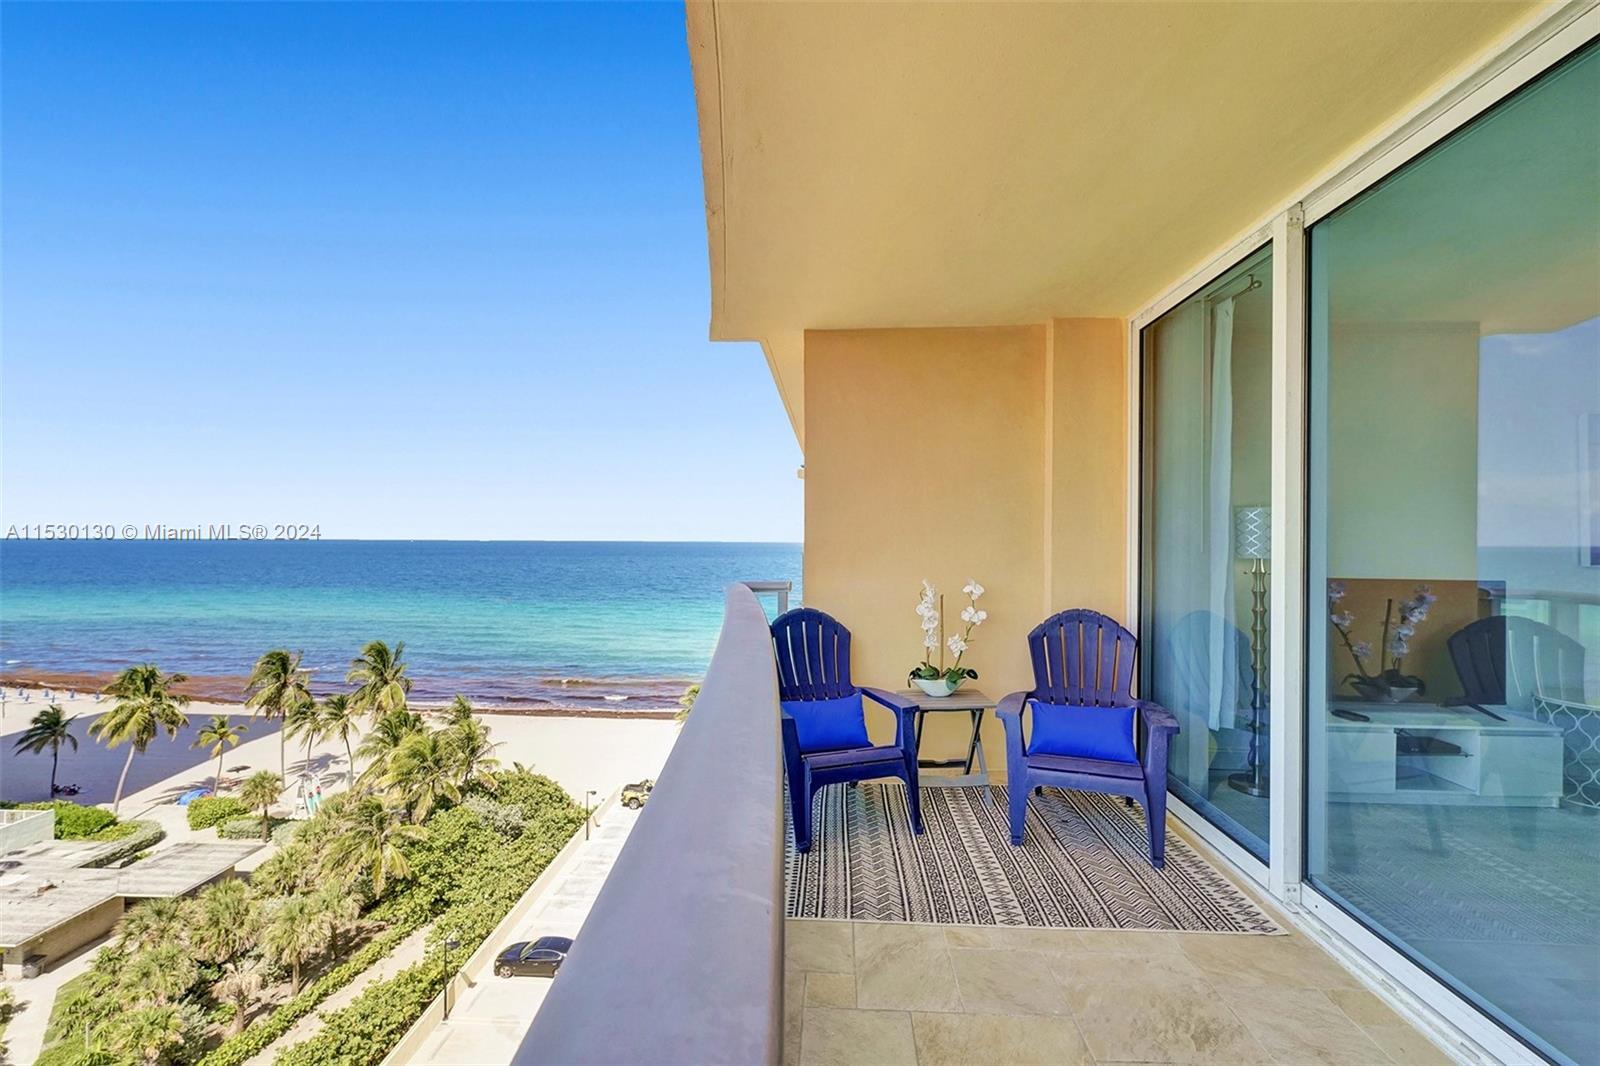 Photo of 2501 S Ocean Dr #905 (Available May 2) in Hollywood, FL